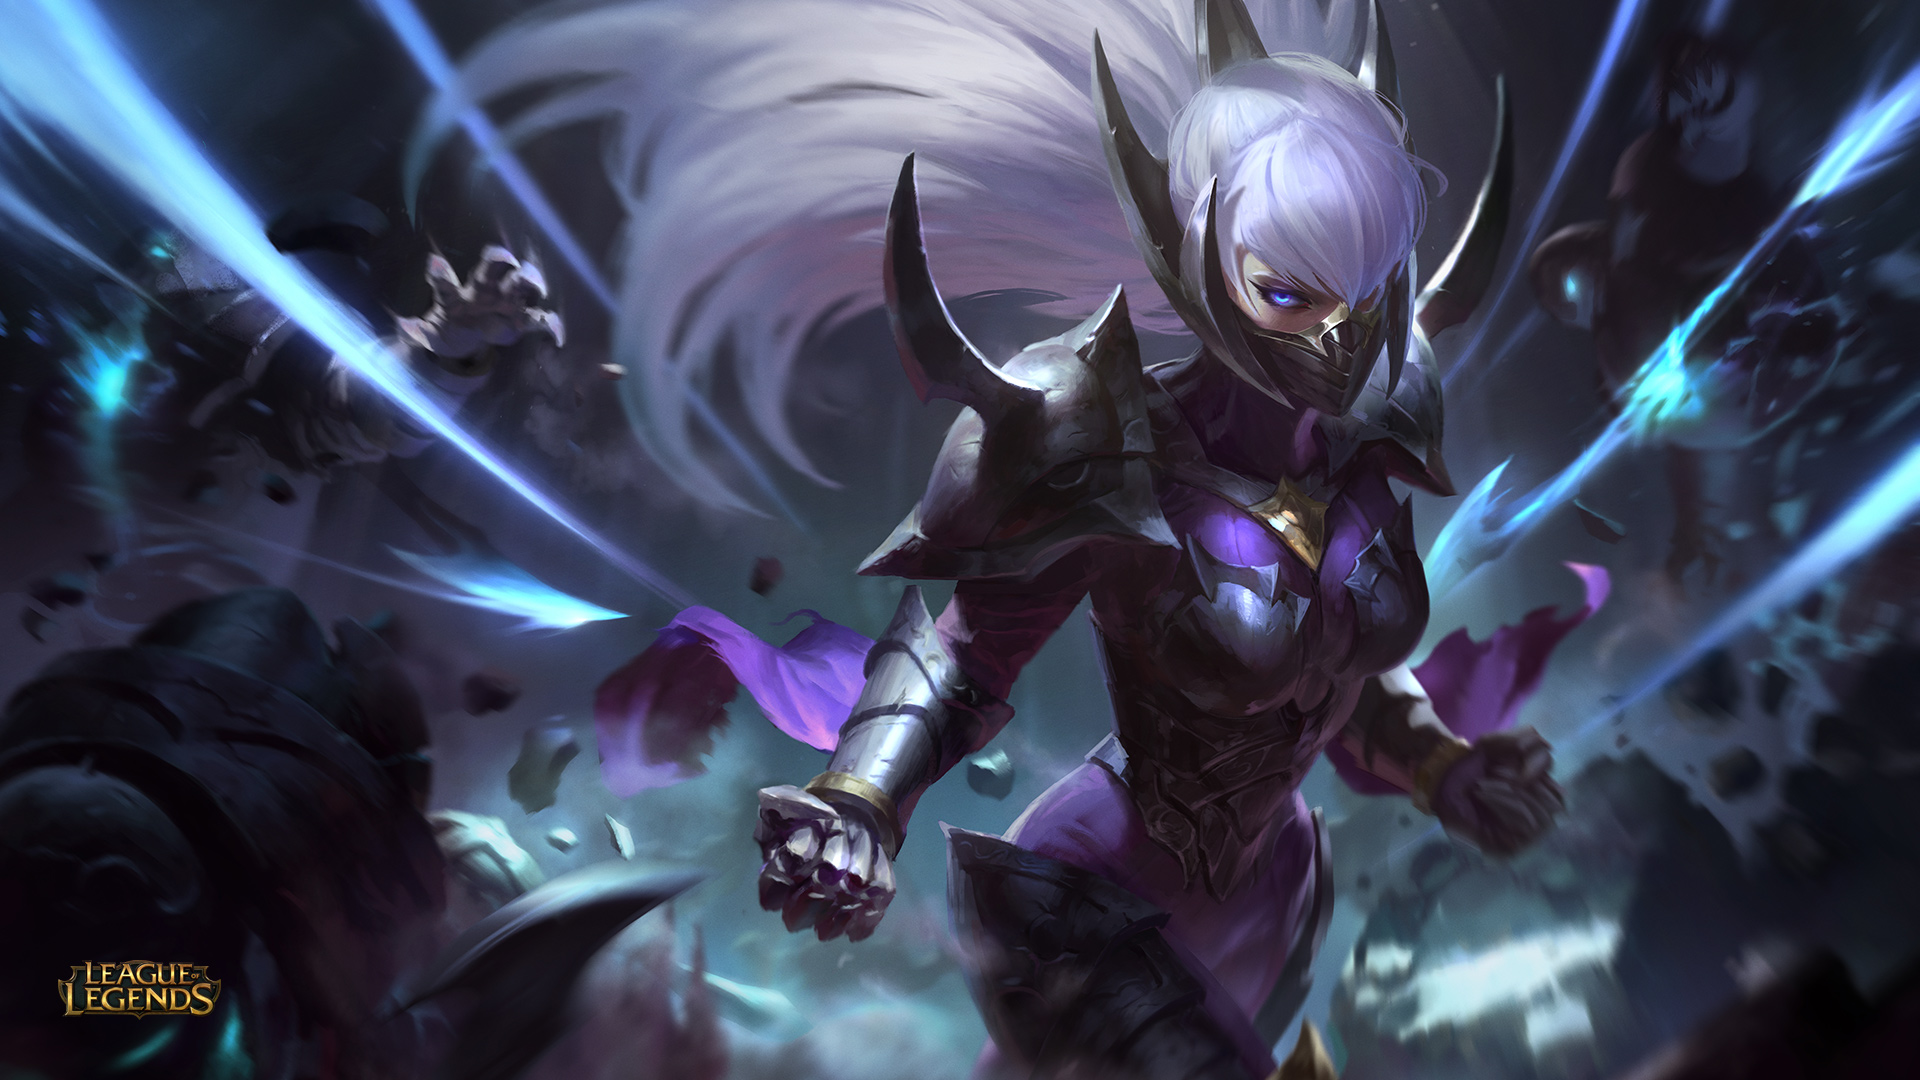 League Of Legends Irelia PC Gaming Video Games Blue Eyes Fantasy Girl 1920x1080